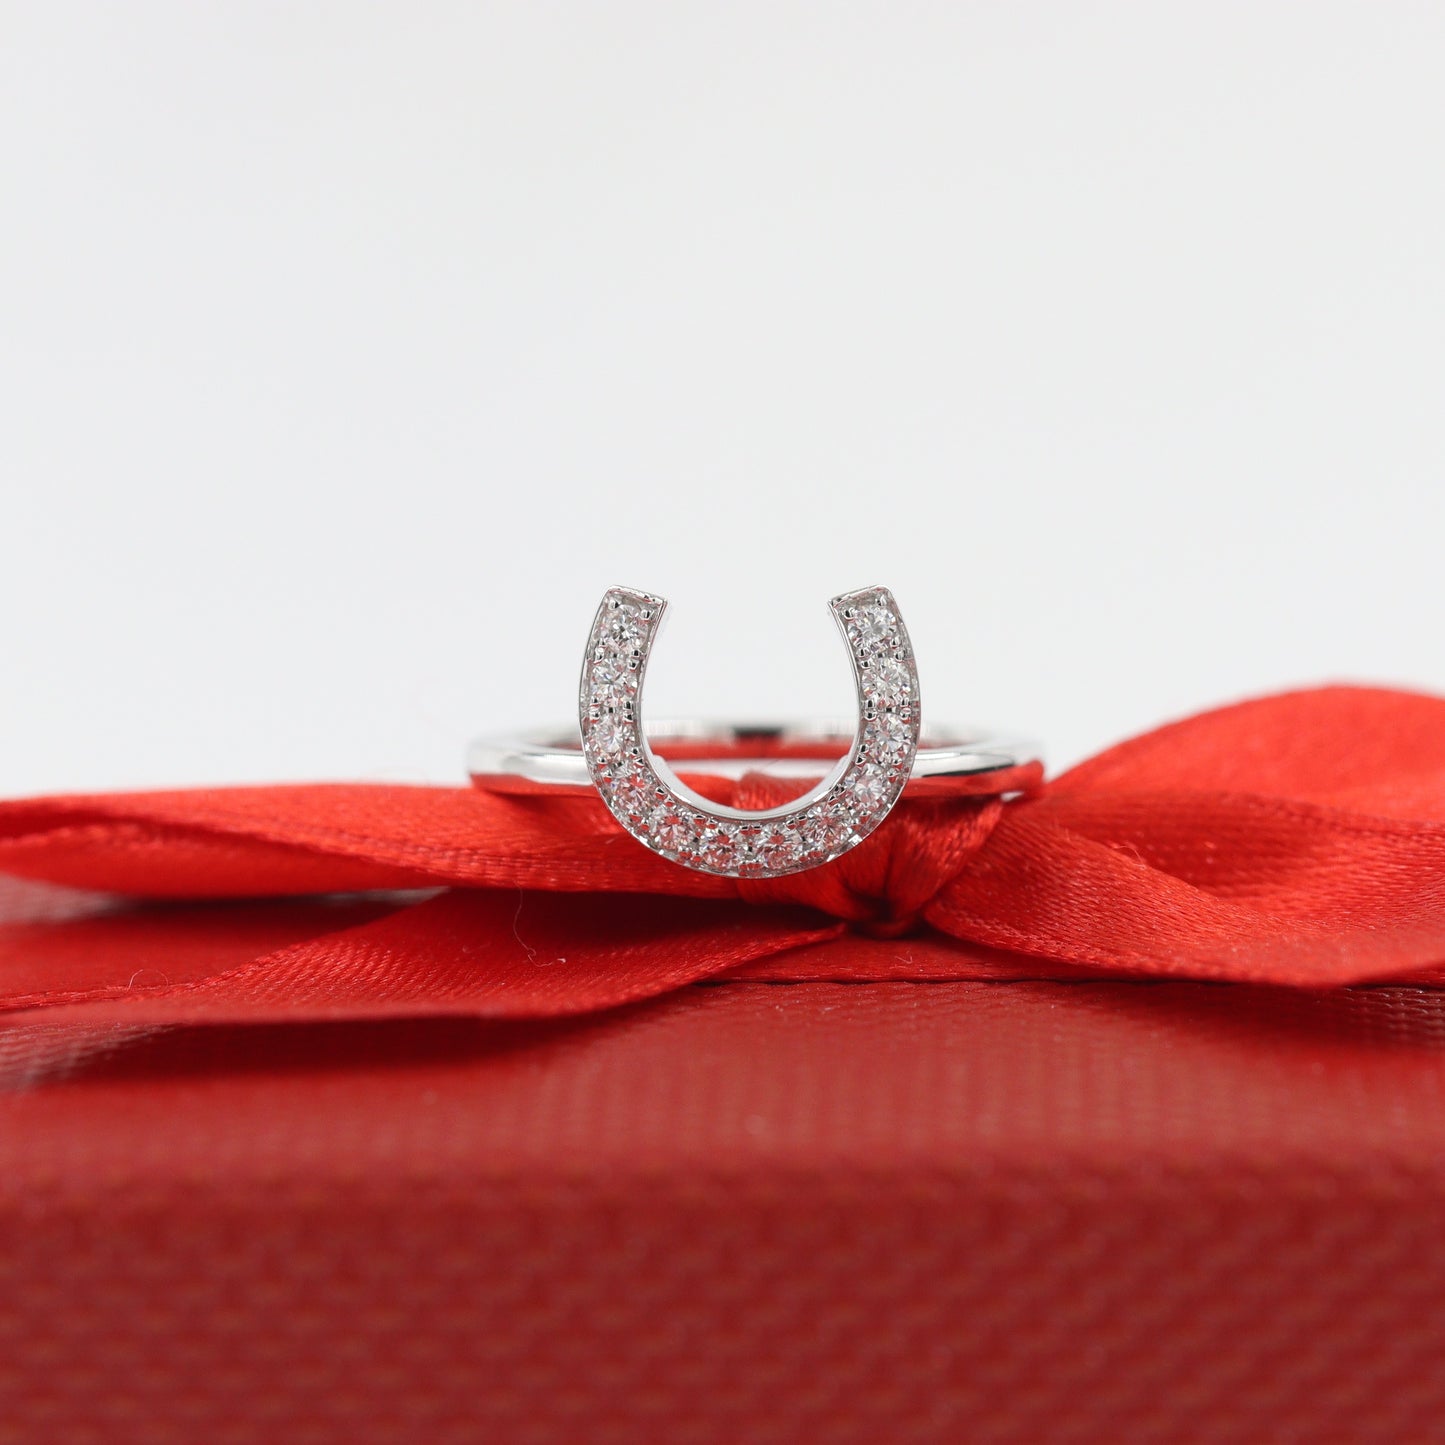 Stackable Horse Shoe Diamond Ring /Unique Stackable Horse shoe Diamond Band/ Natural Diamond Horse shoe Ring/Anniversary Gift